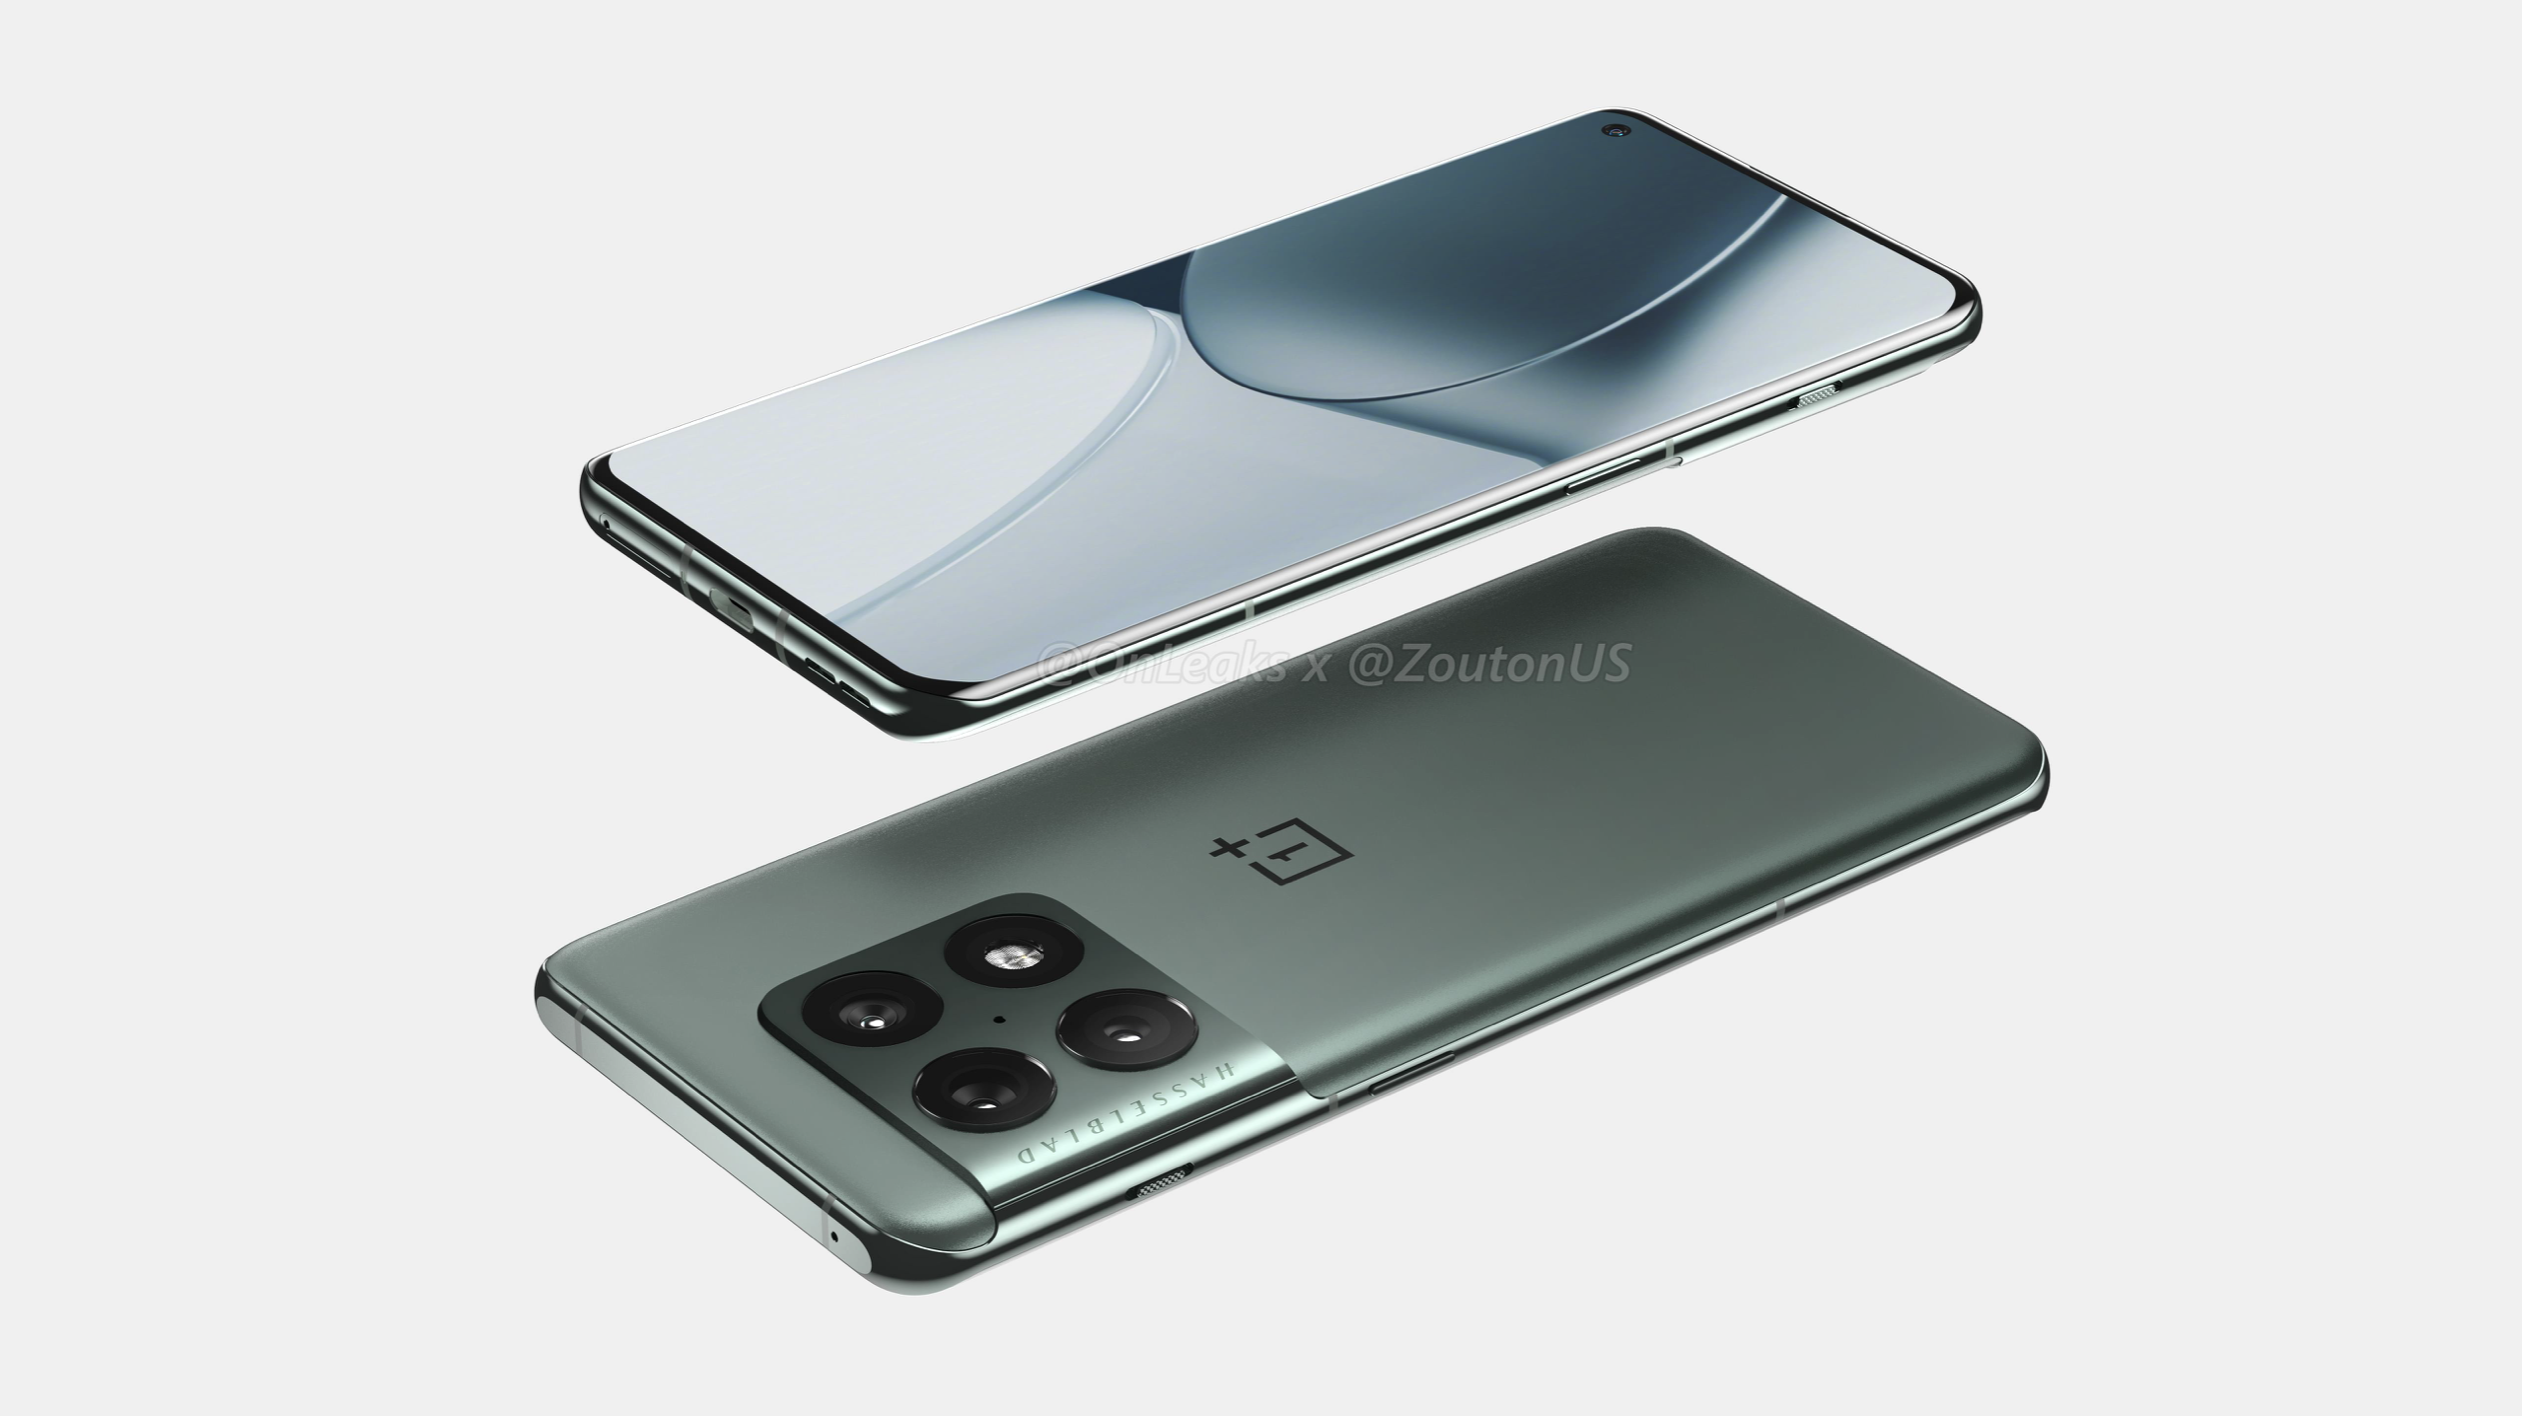 OnePlus 10 Pro will be one of the first smartphones on the market with Snapdragon 8 Gen1 chip